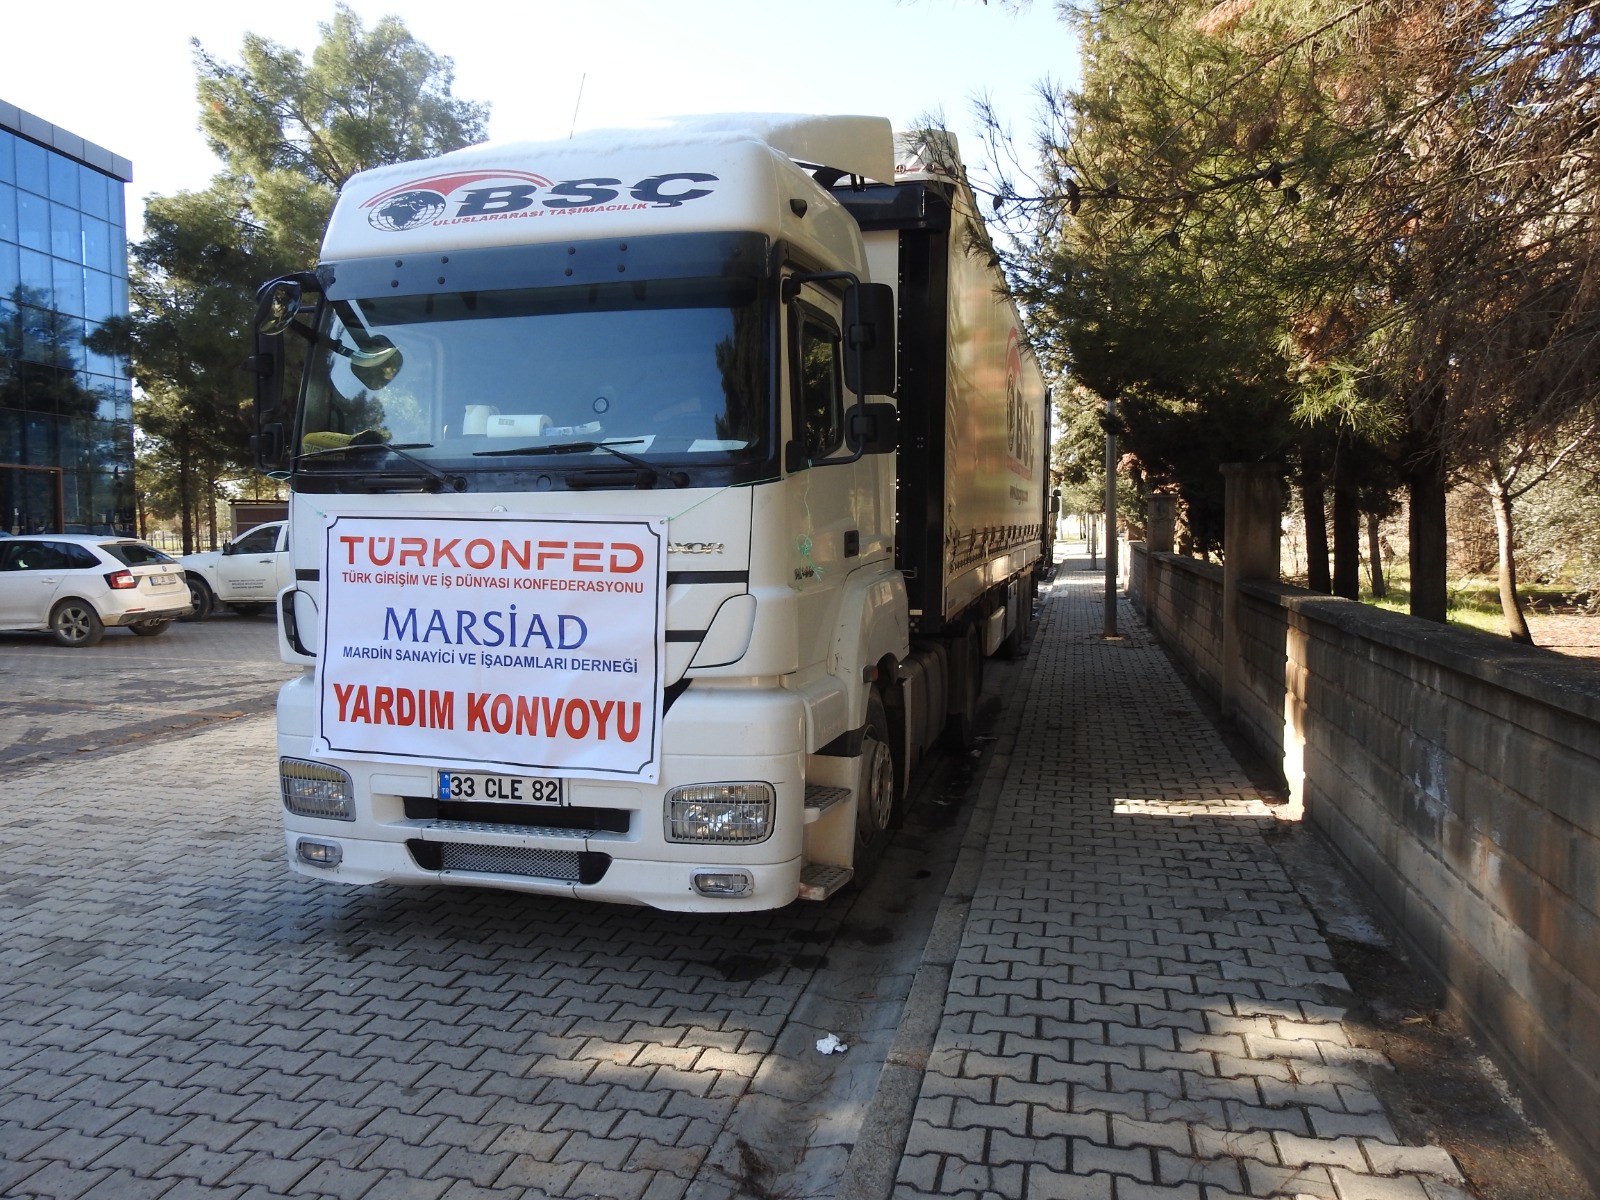 Türkonfed truck loaded with donations